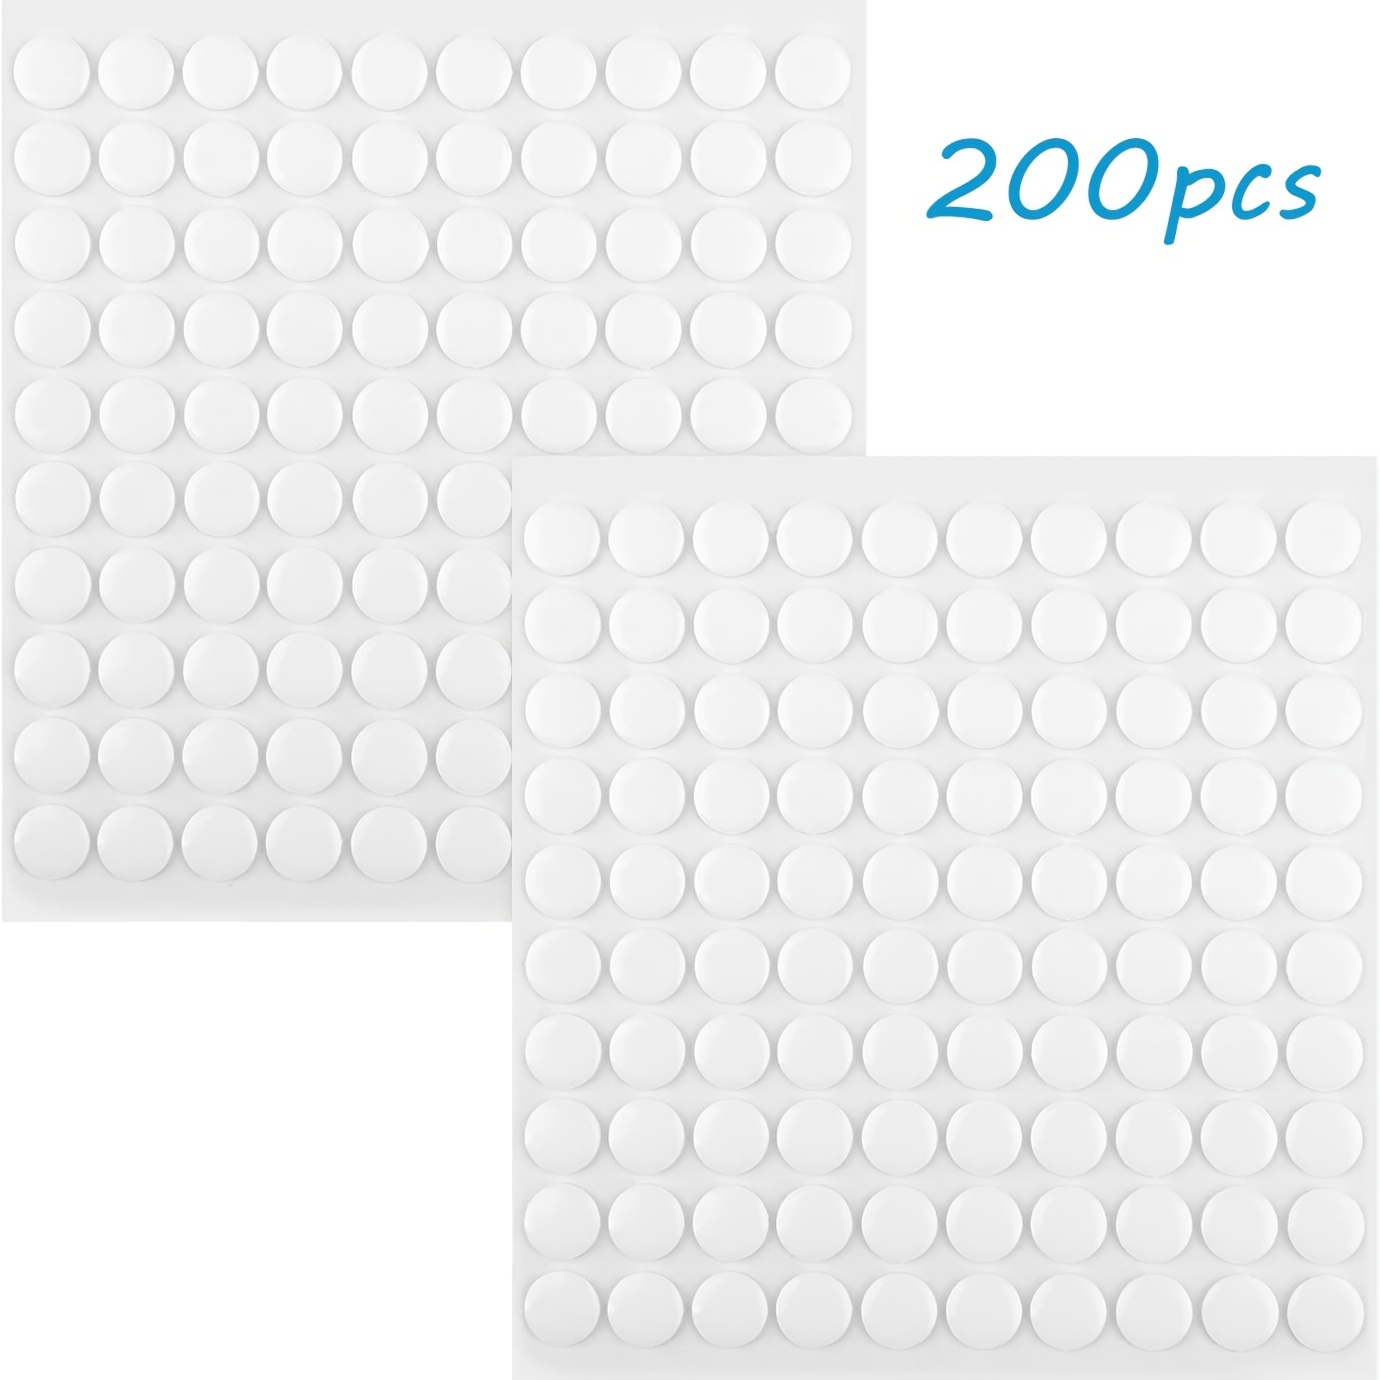 Double-Sided Adhesive Dots Transparent,Double-Sided Tape Stickers Round  Acrylic No Traces Adhesive Sticker Waterproof Adhesive Dots Sticker for  Craft